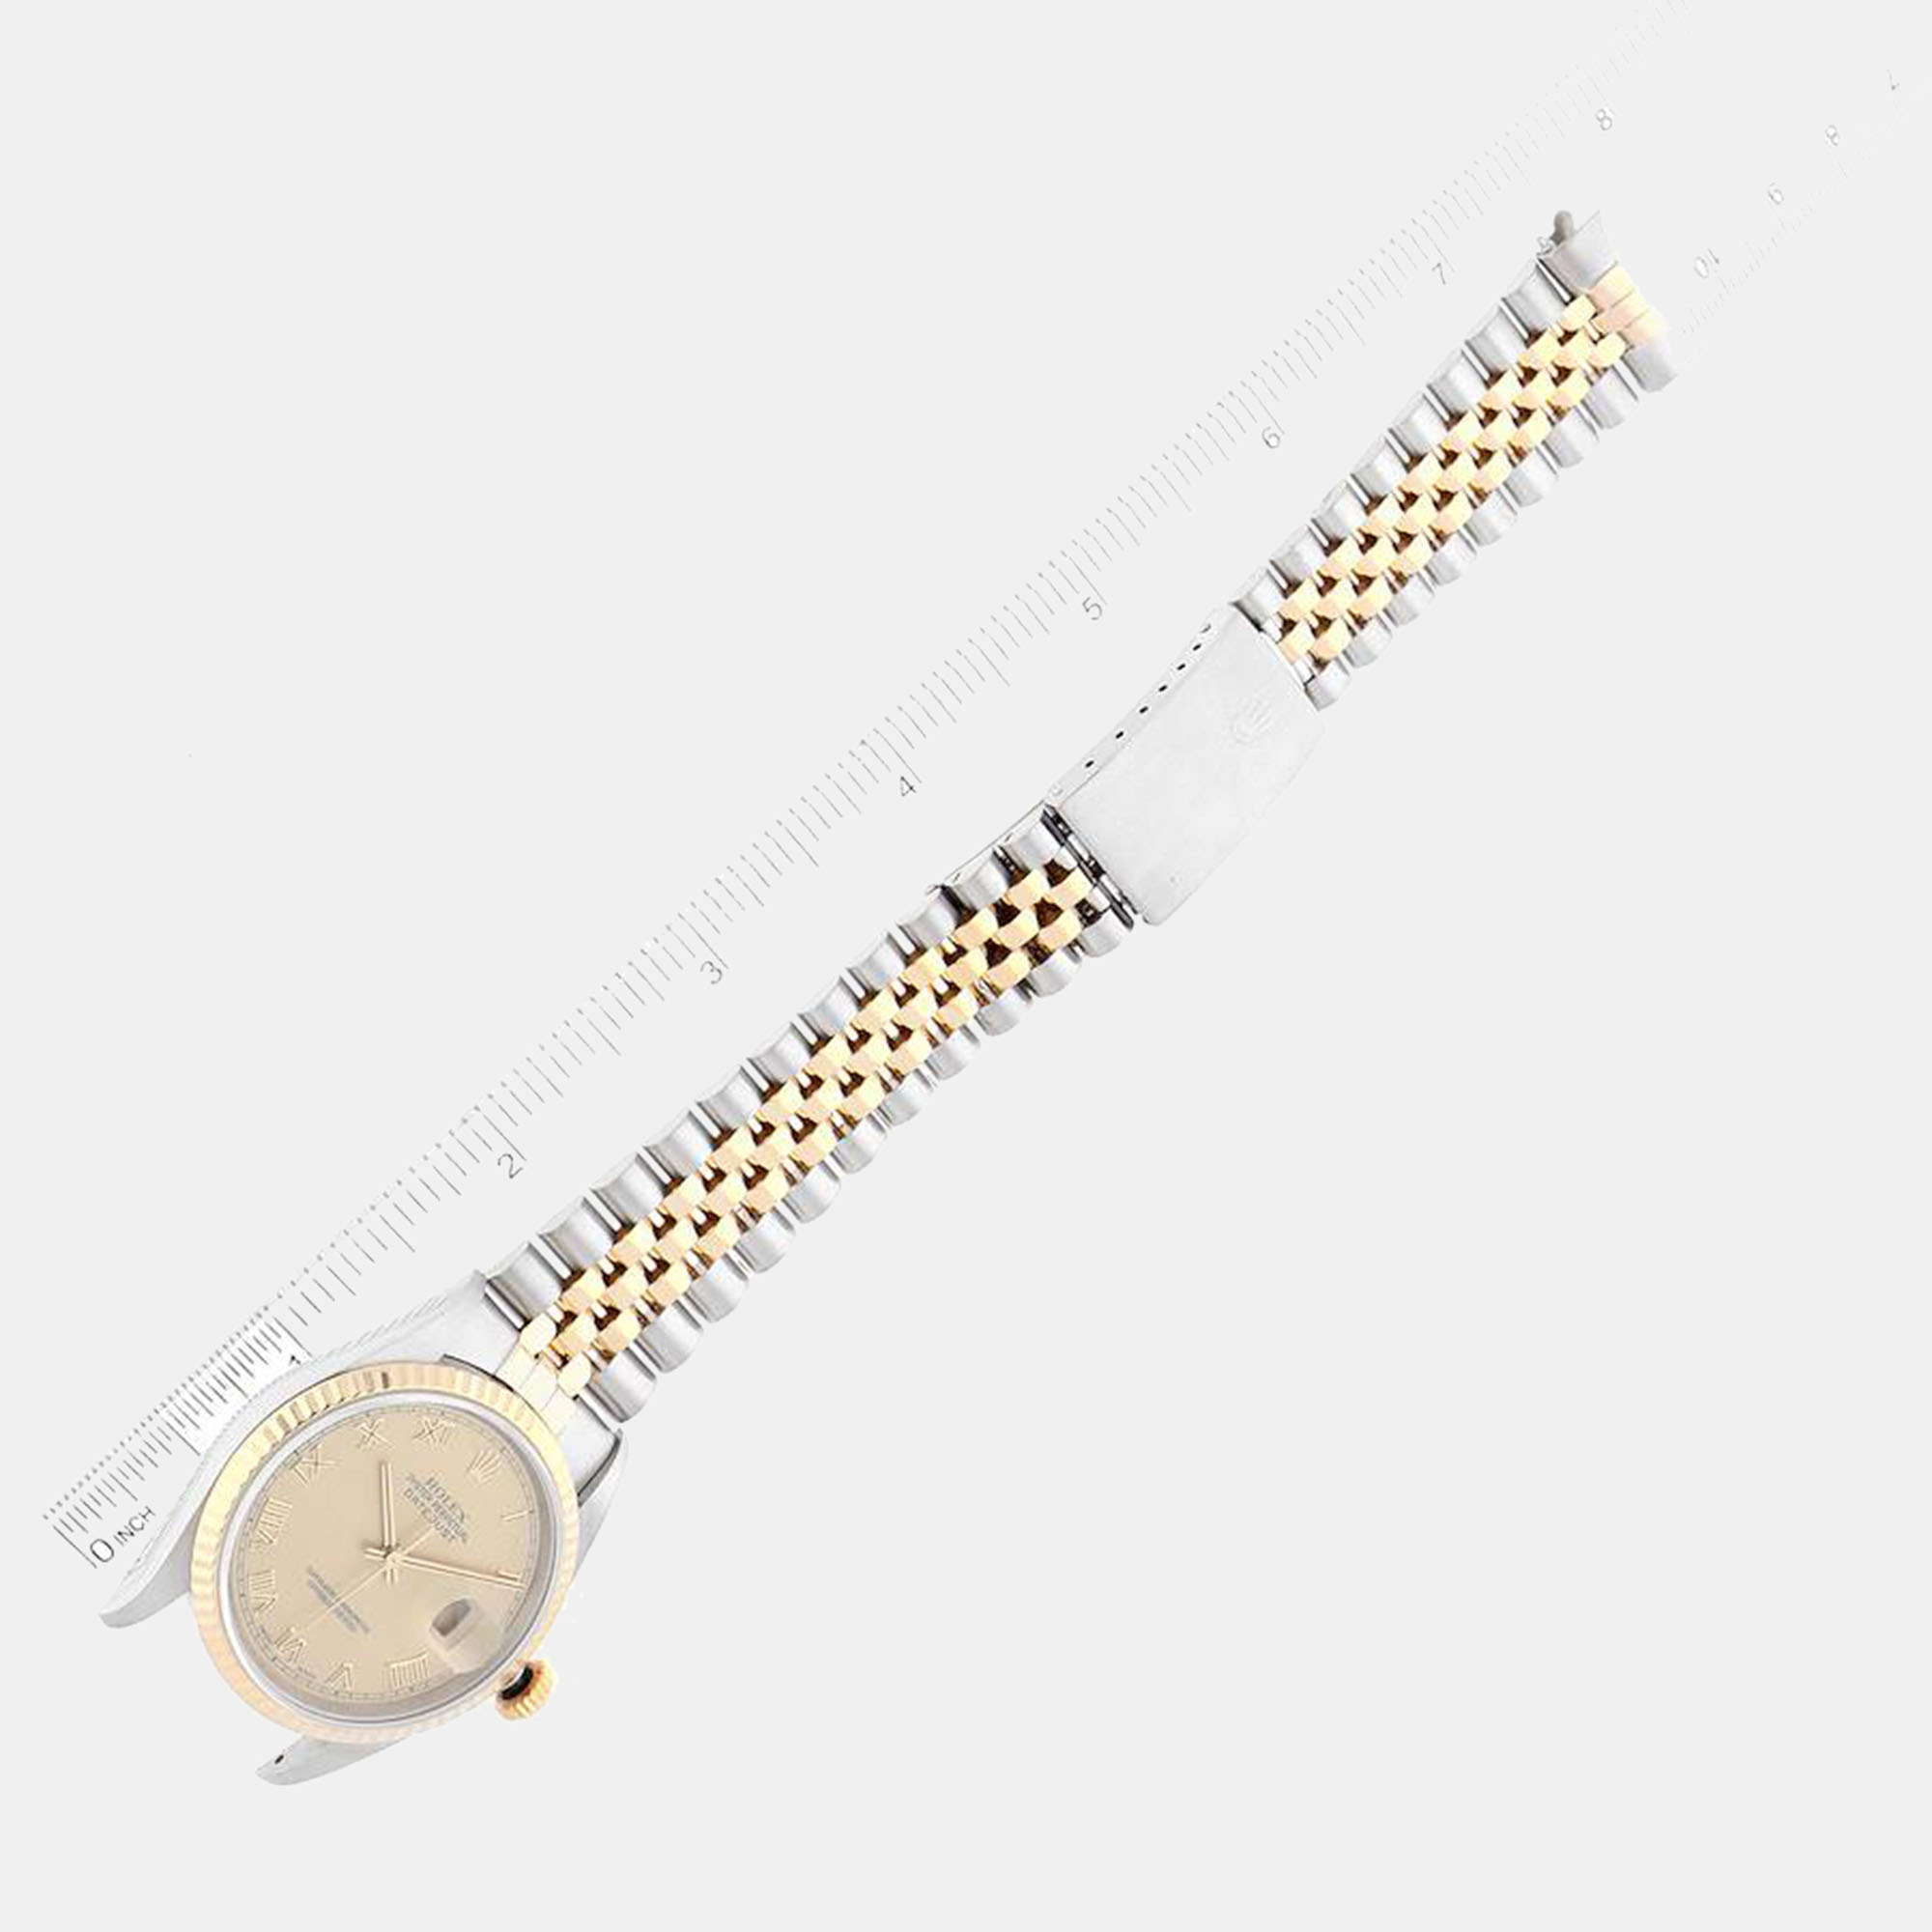 Rolex Datejust Steel Yellow Gold Champagne Dial Men's Watch 16233 36 Mm